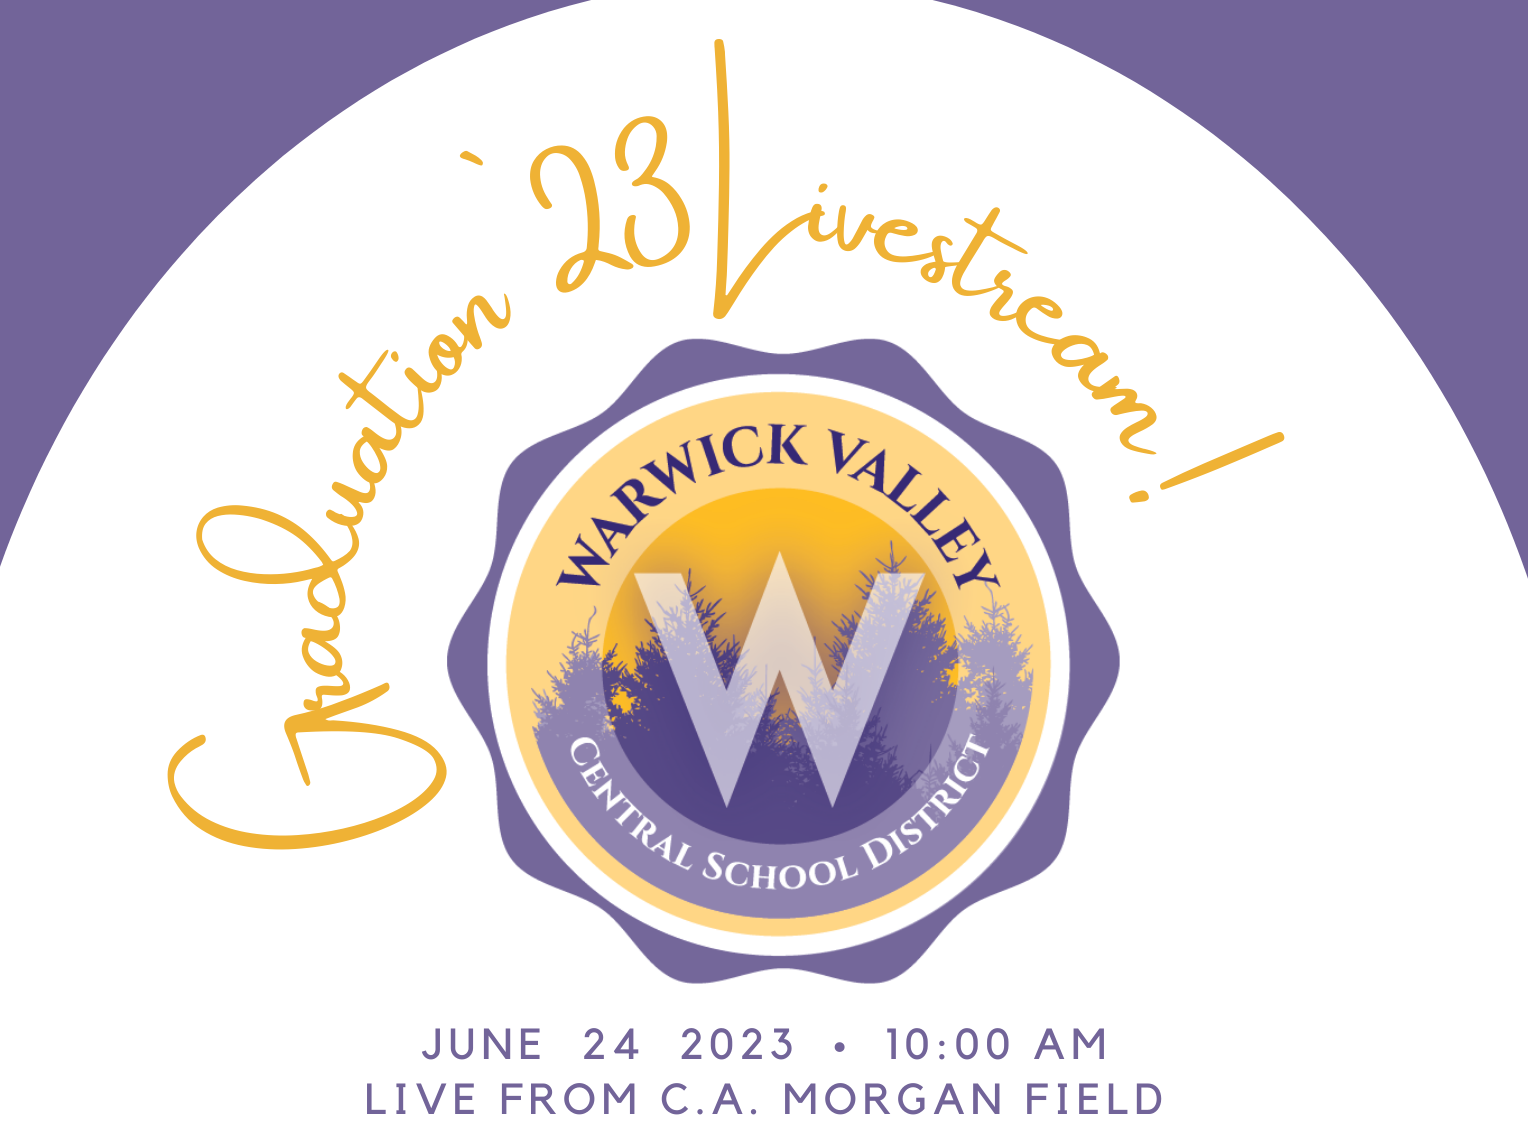 WVHS Class of 2023 Commencement will be livestreamed Warwick Valley Central Schools